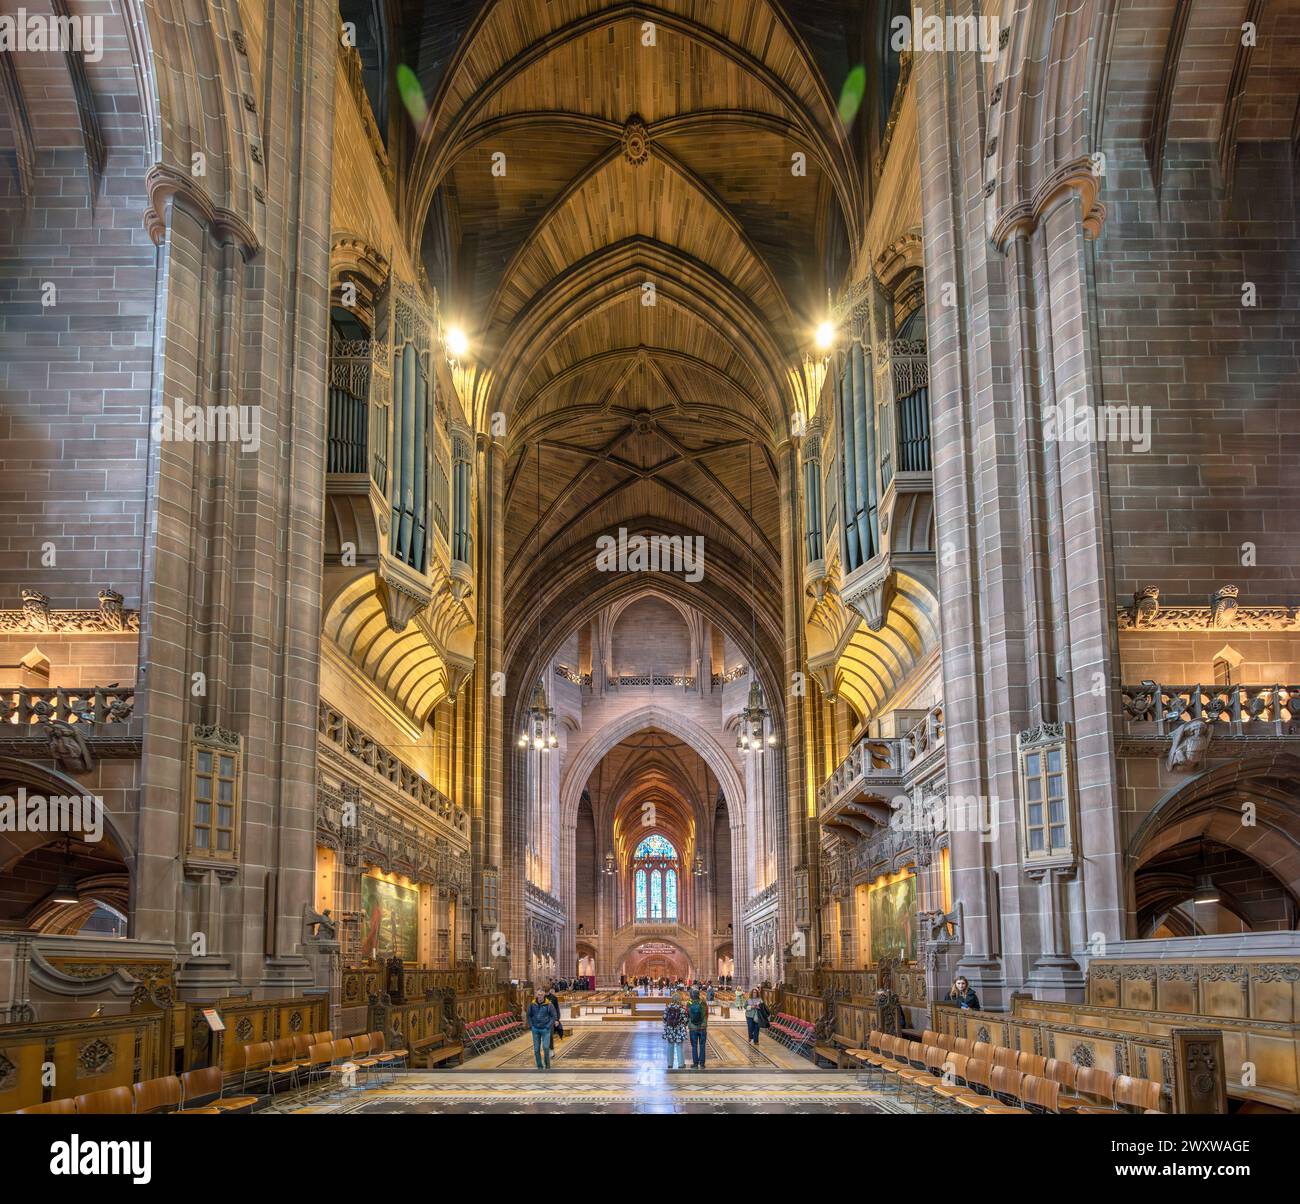 View toward the Nave of Liverpool Anglican Cathedral from the Choir, Liverpool, England, UK Stock Photo